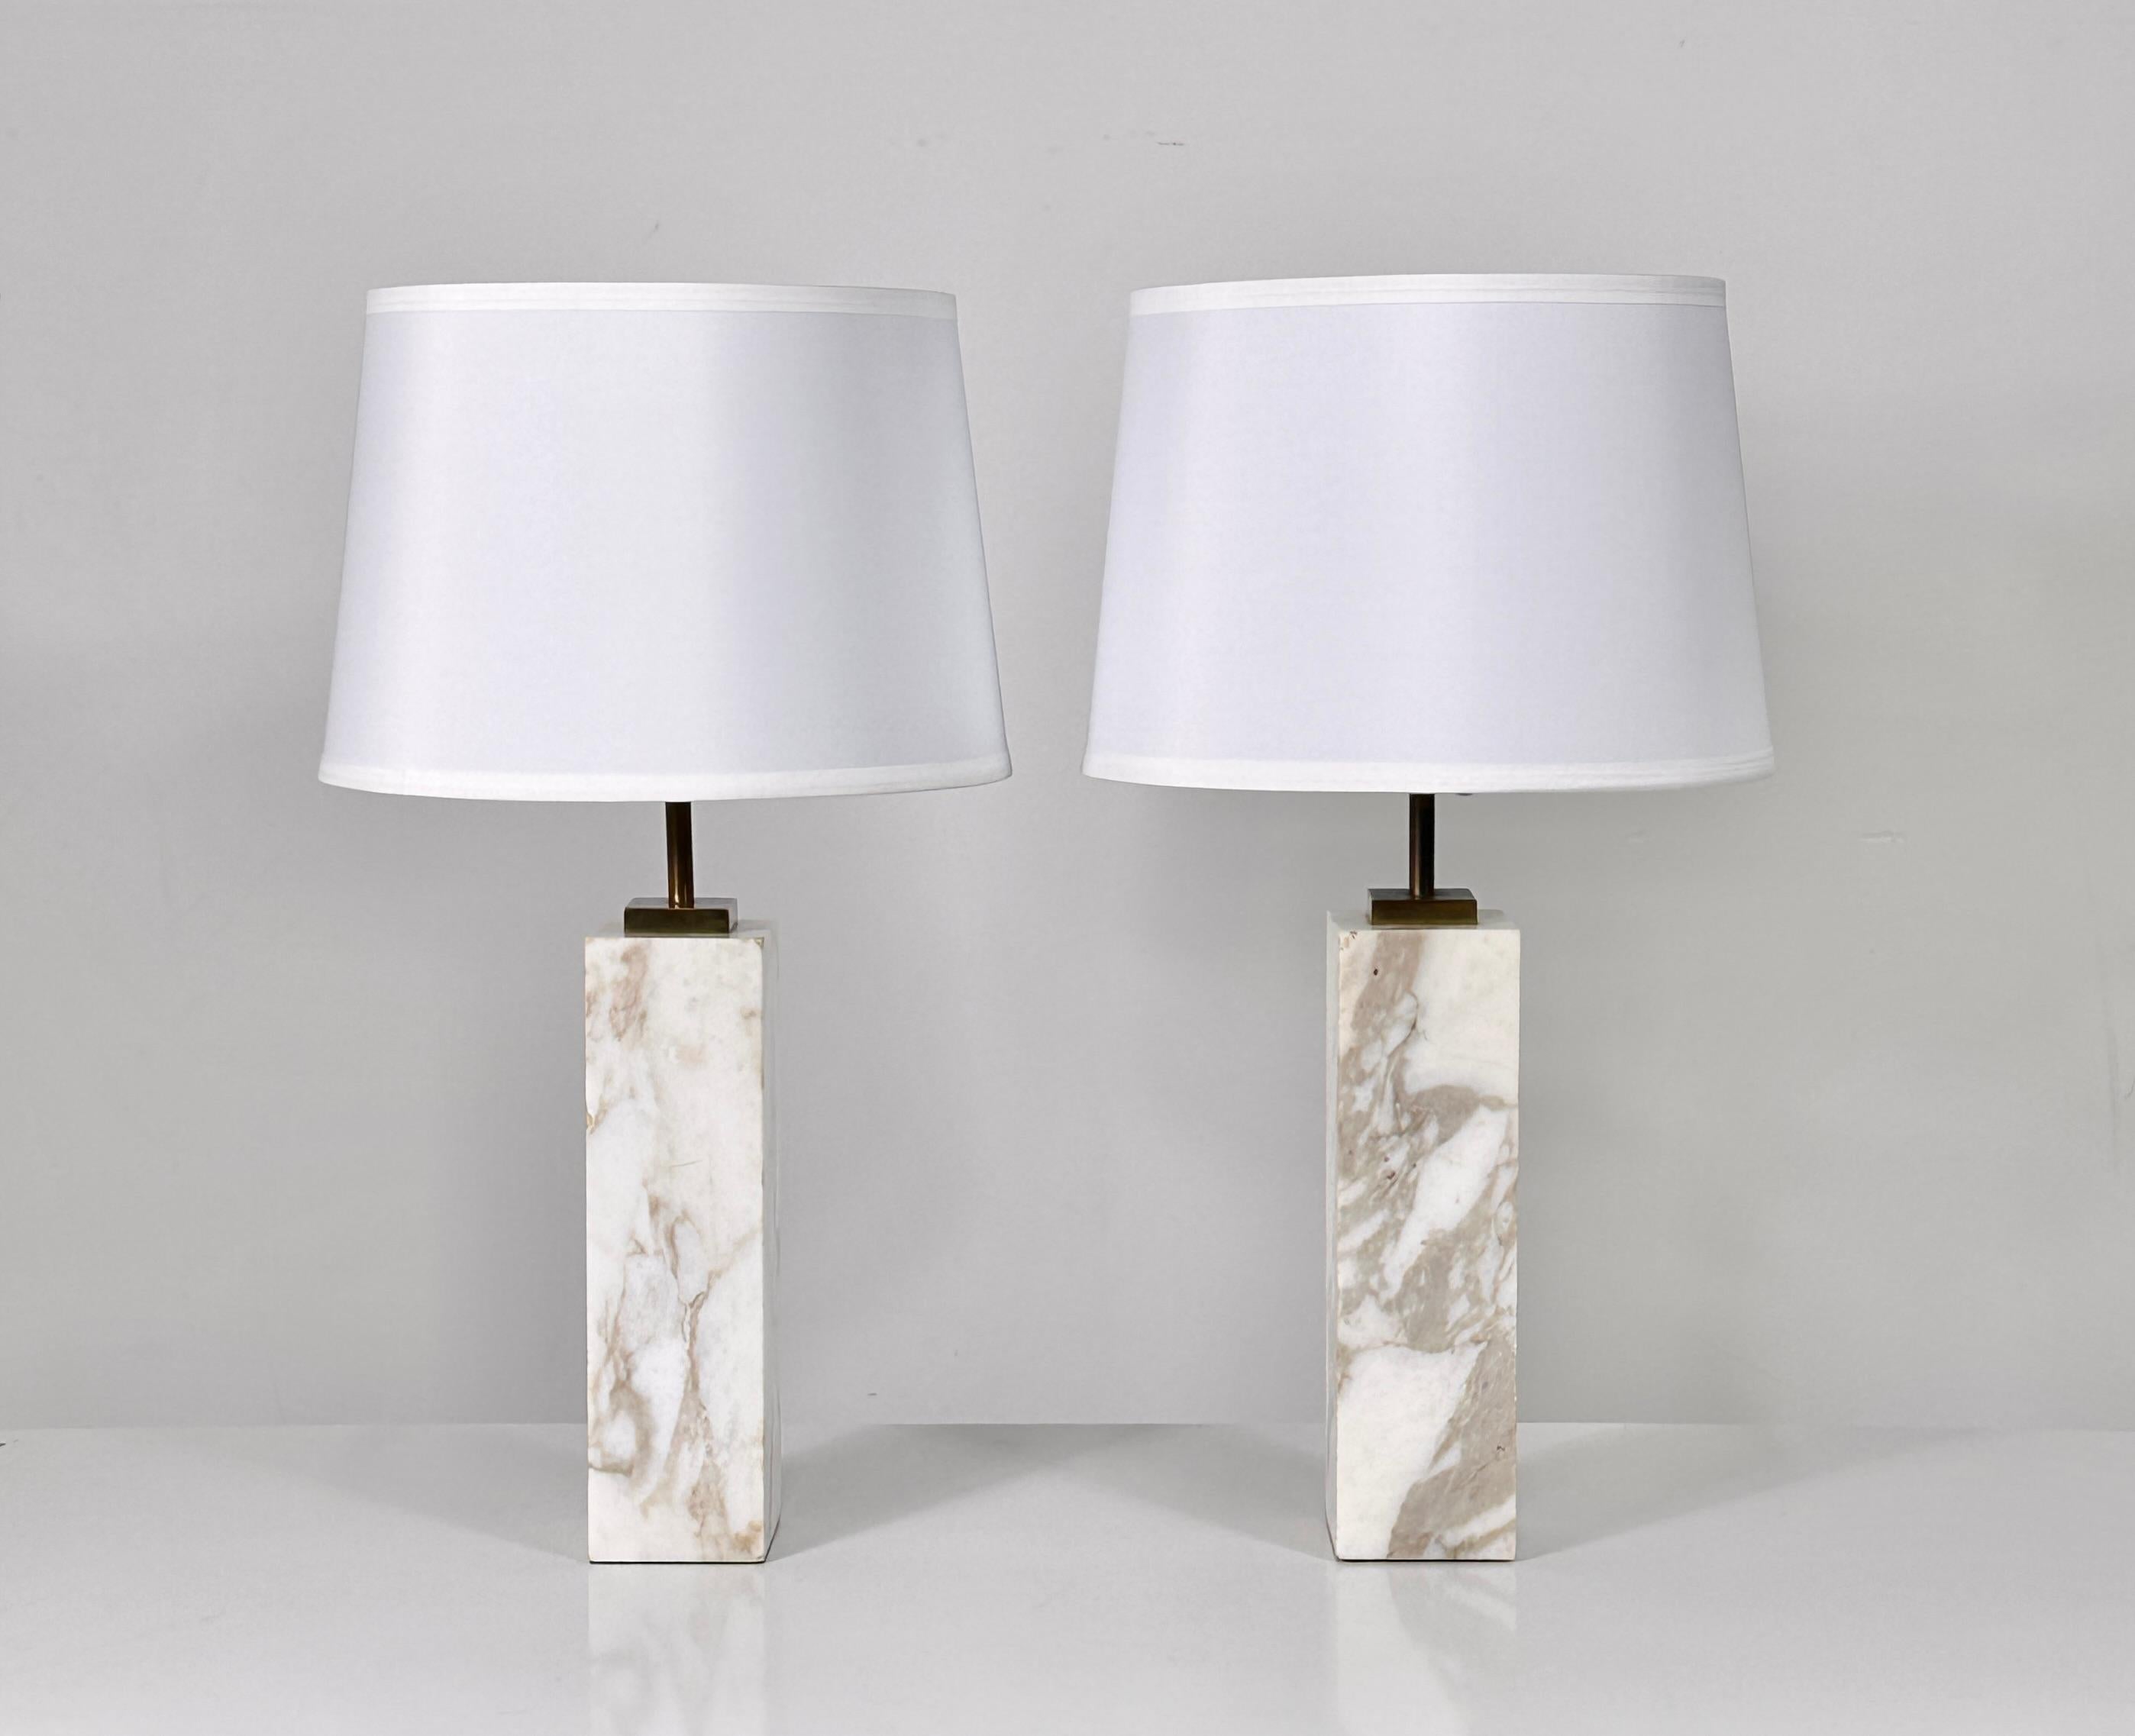 Elegant pair of table lamps designed by TH Robsjohn Gibbings for Hansen 1950s
Calcutta gold marble squared column bases with brass fittings and dual pull chain sockets
Signed to diffuser